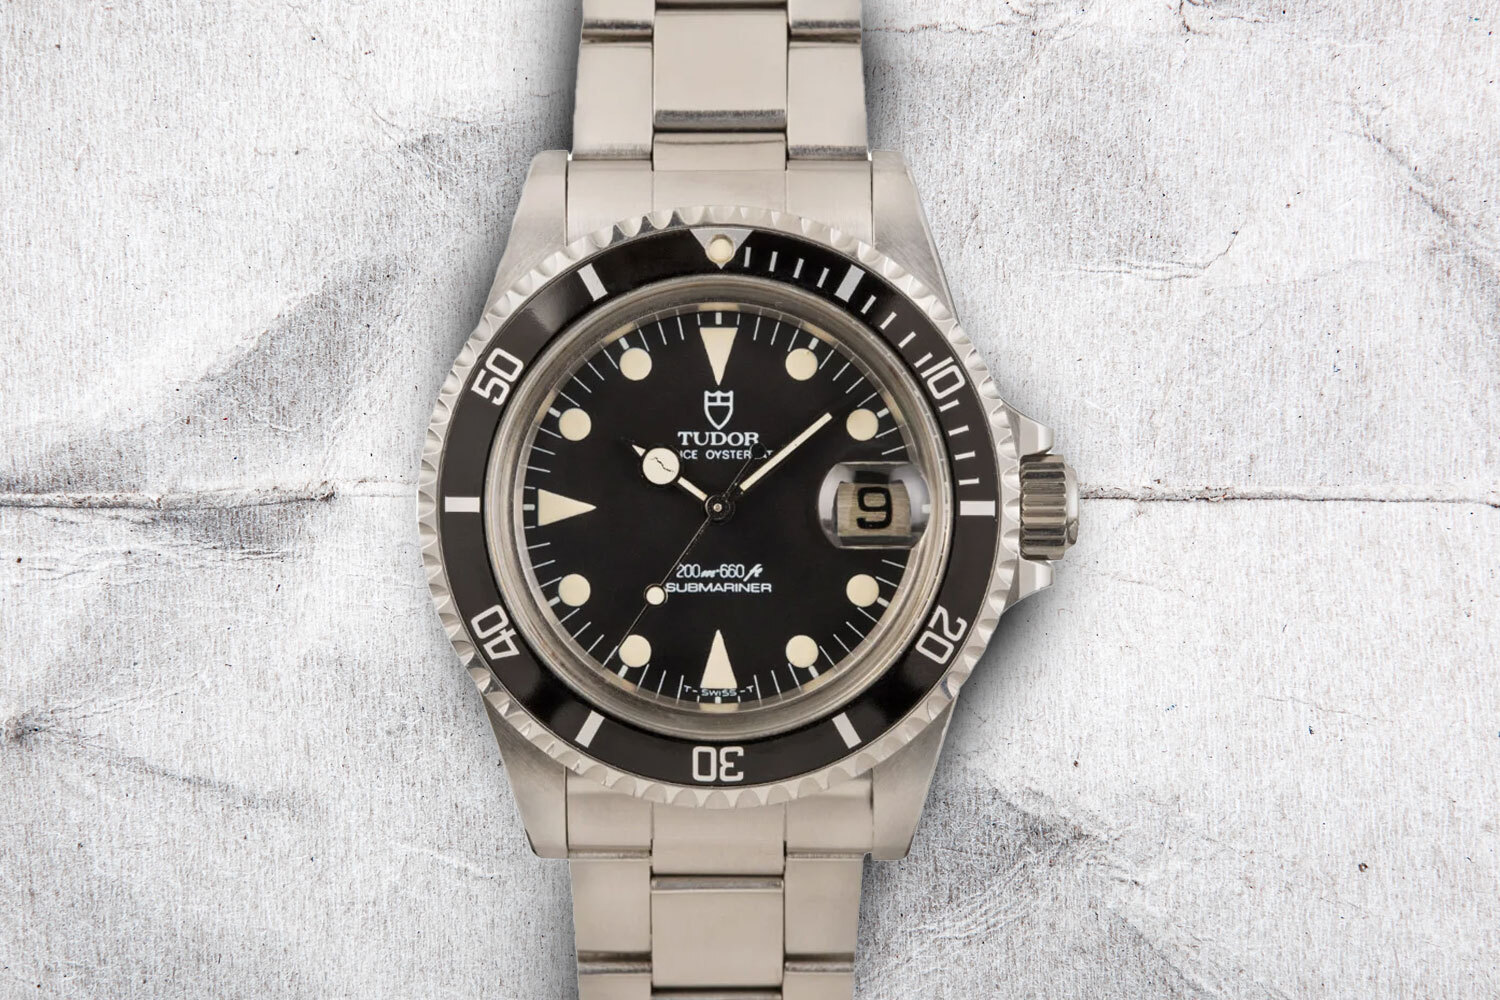 Tudor Submariner, one of the best vintage watches under $10,000, on a gray background. 